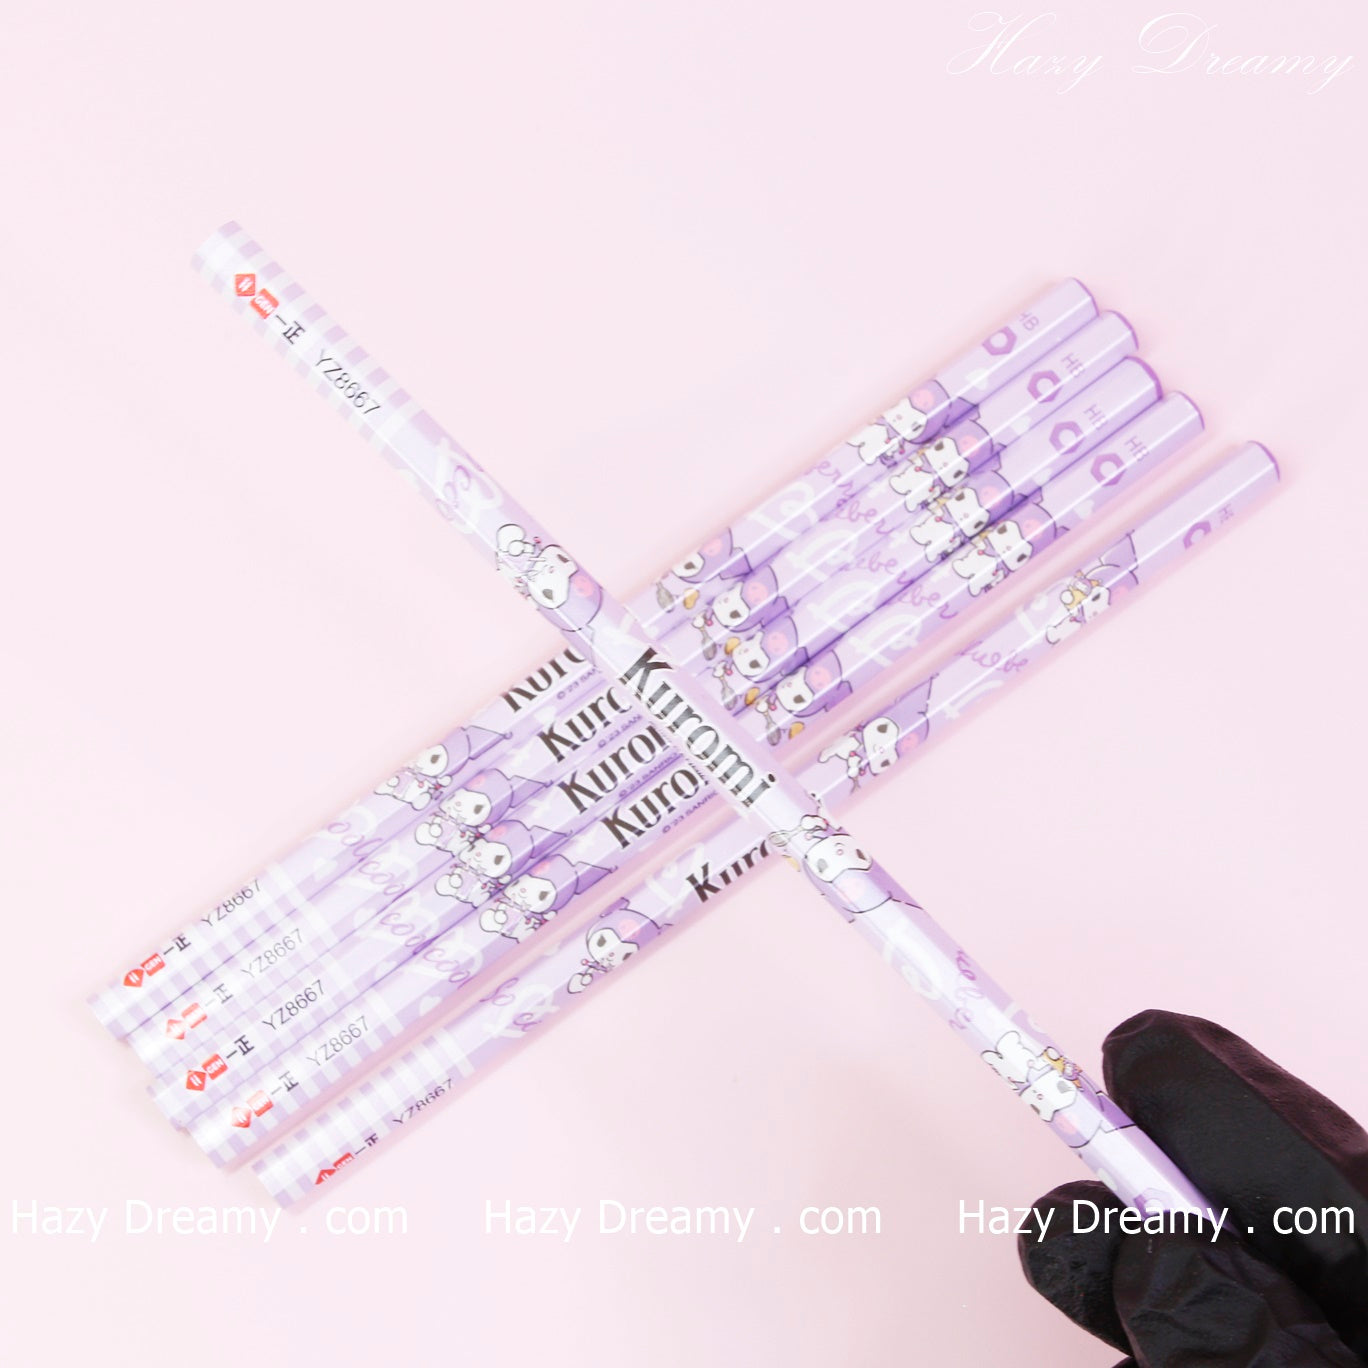 Hello Kitty Pencils Set featuring adorable Hello Kitty graphics, perfect for writing and drawing